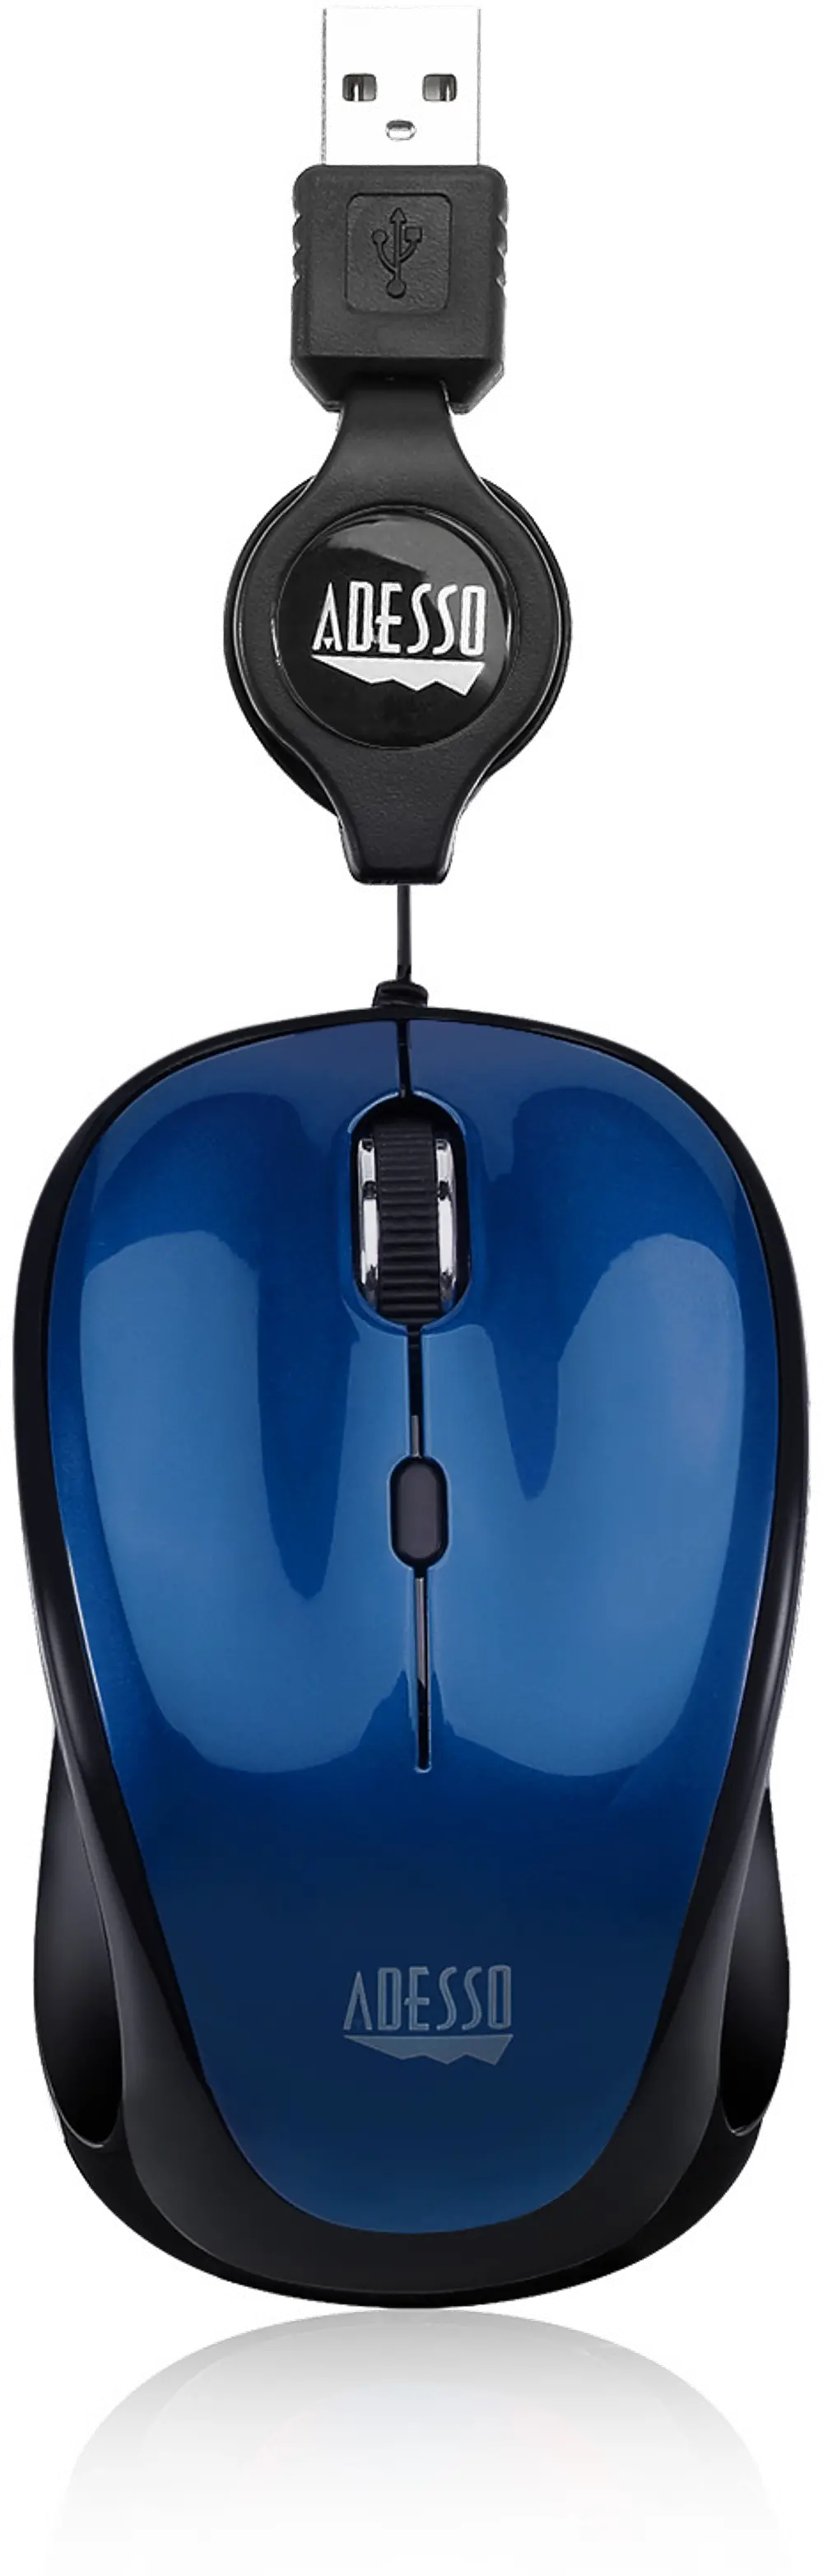 iMOUSE-S8 BLUE Adesso Blue USB Illuminated Retractable Mouse - iMouse S8-1